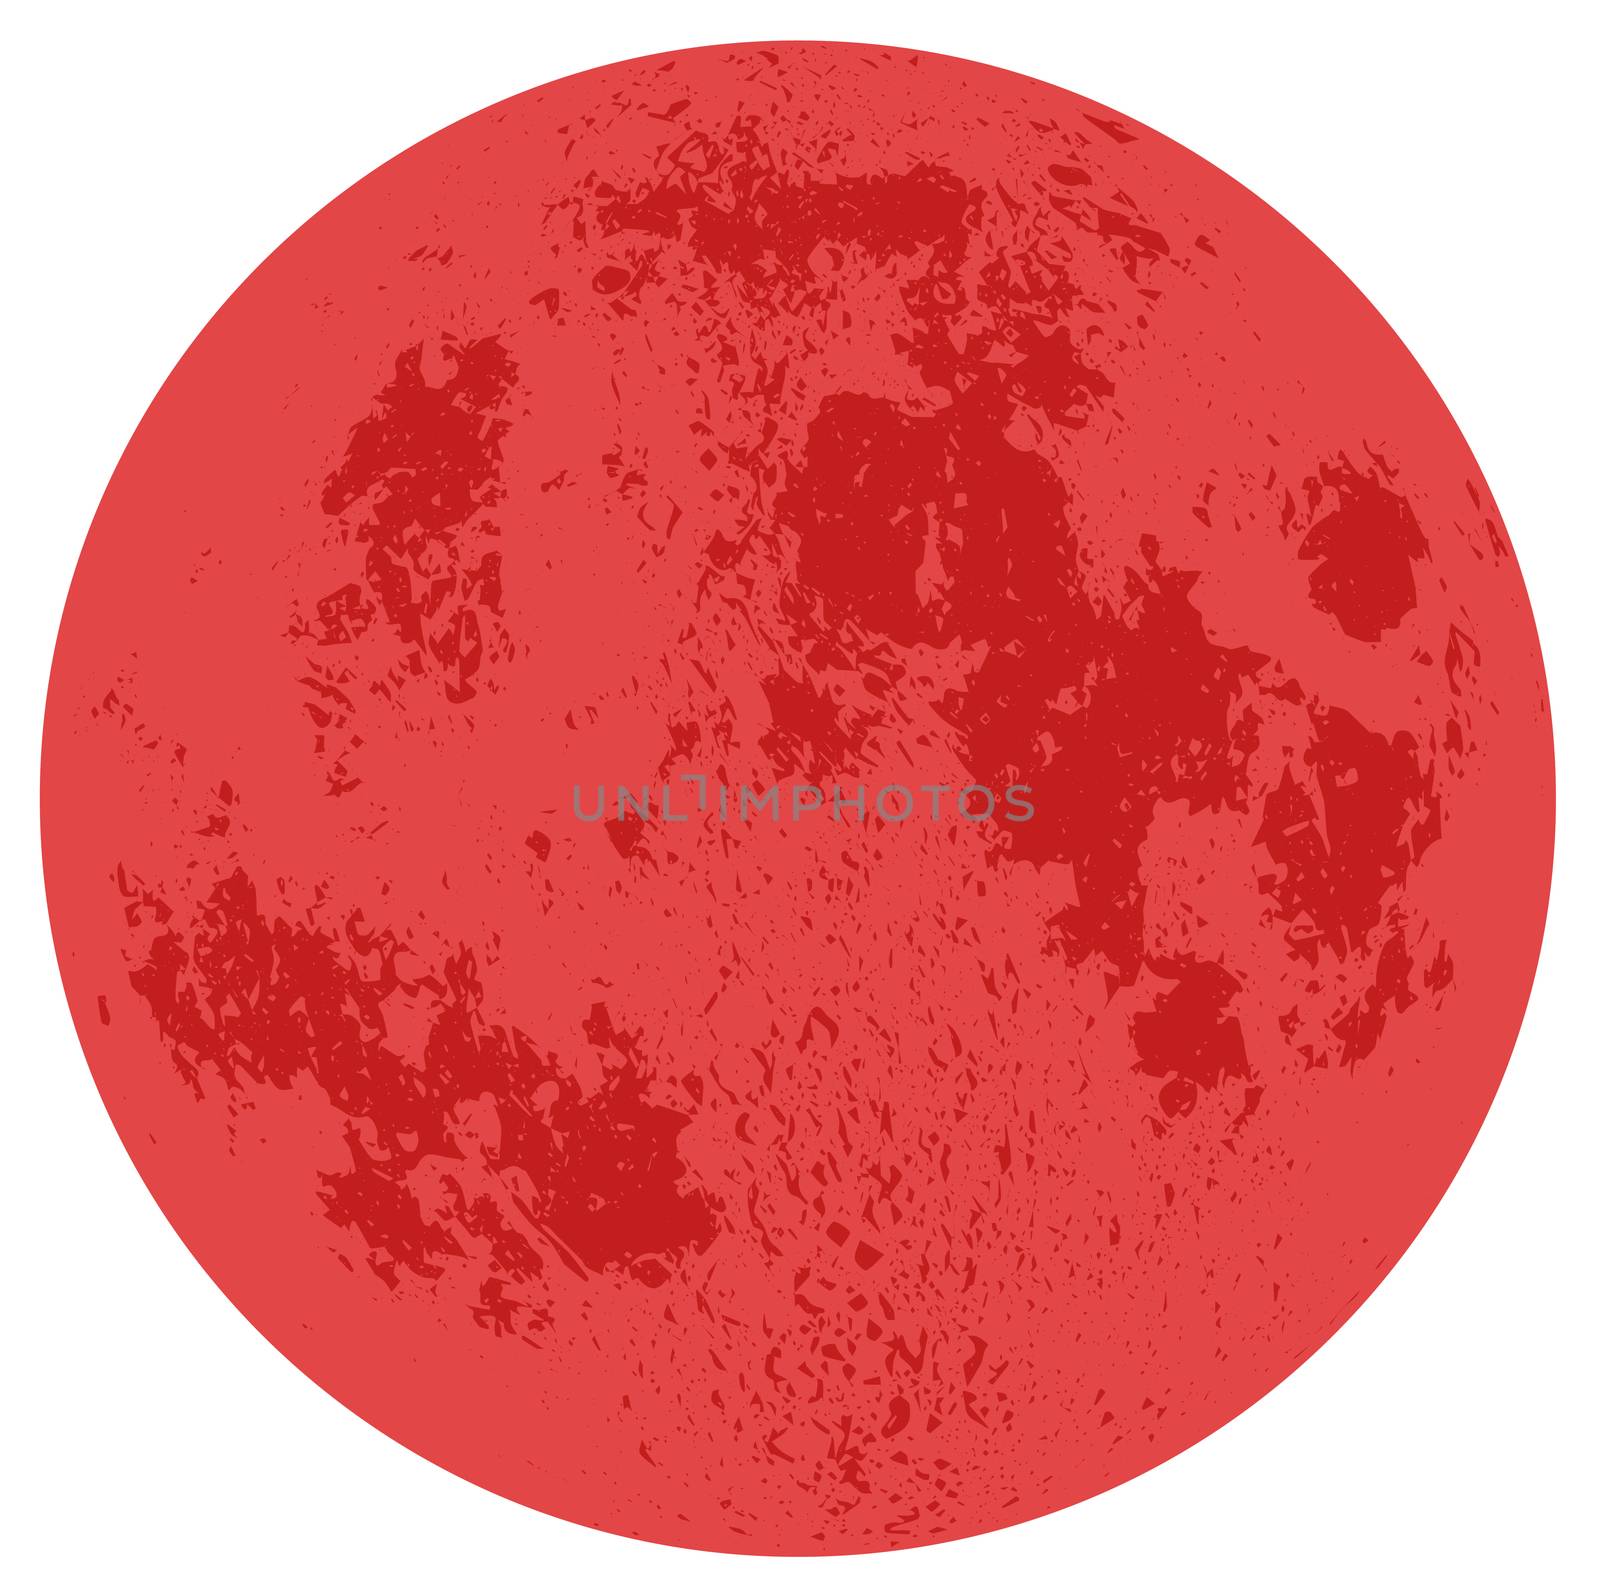 A red moon image.